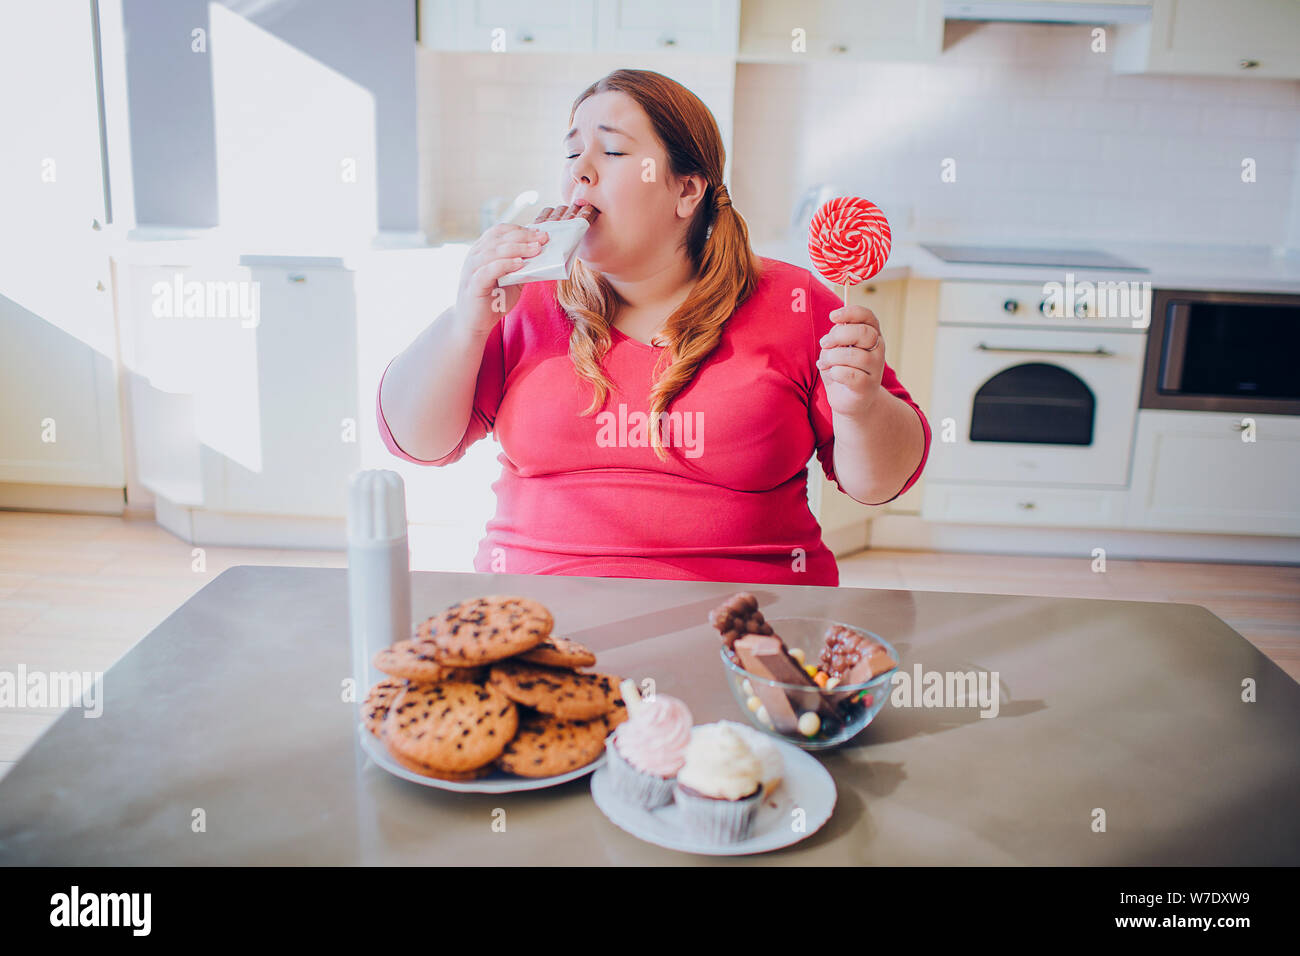 Fat young woman in kitchen sitting and eating sweet food. Biting chocolate. Cookies and cakes on table. Body positive. Daylight Stock Photo